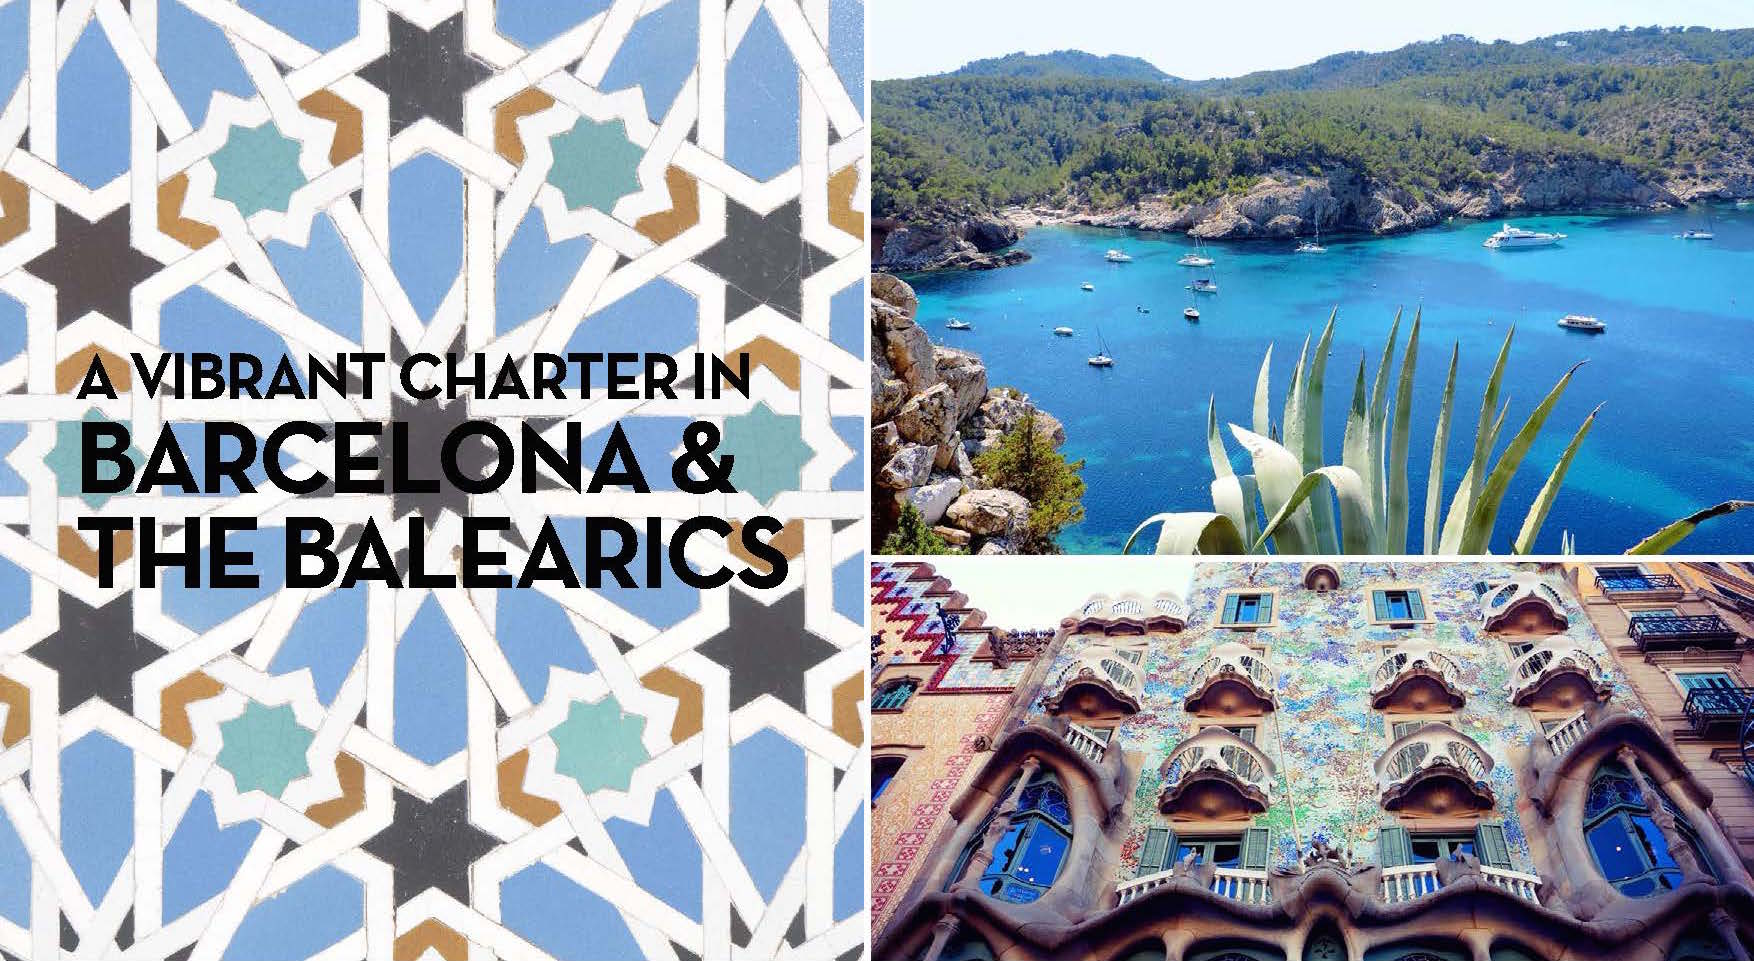 A vibrant charter in Barcelona and the Balearics